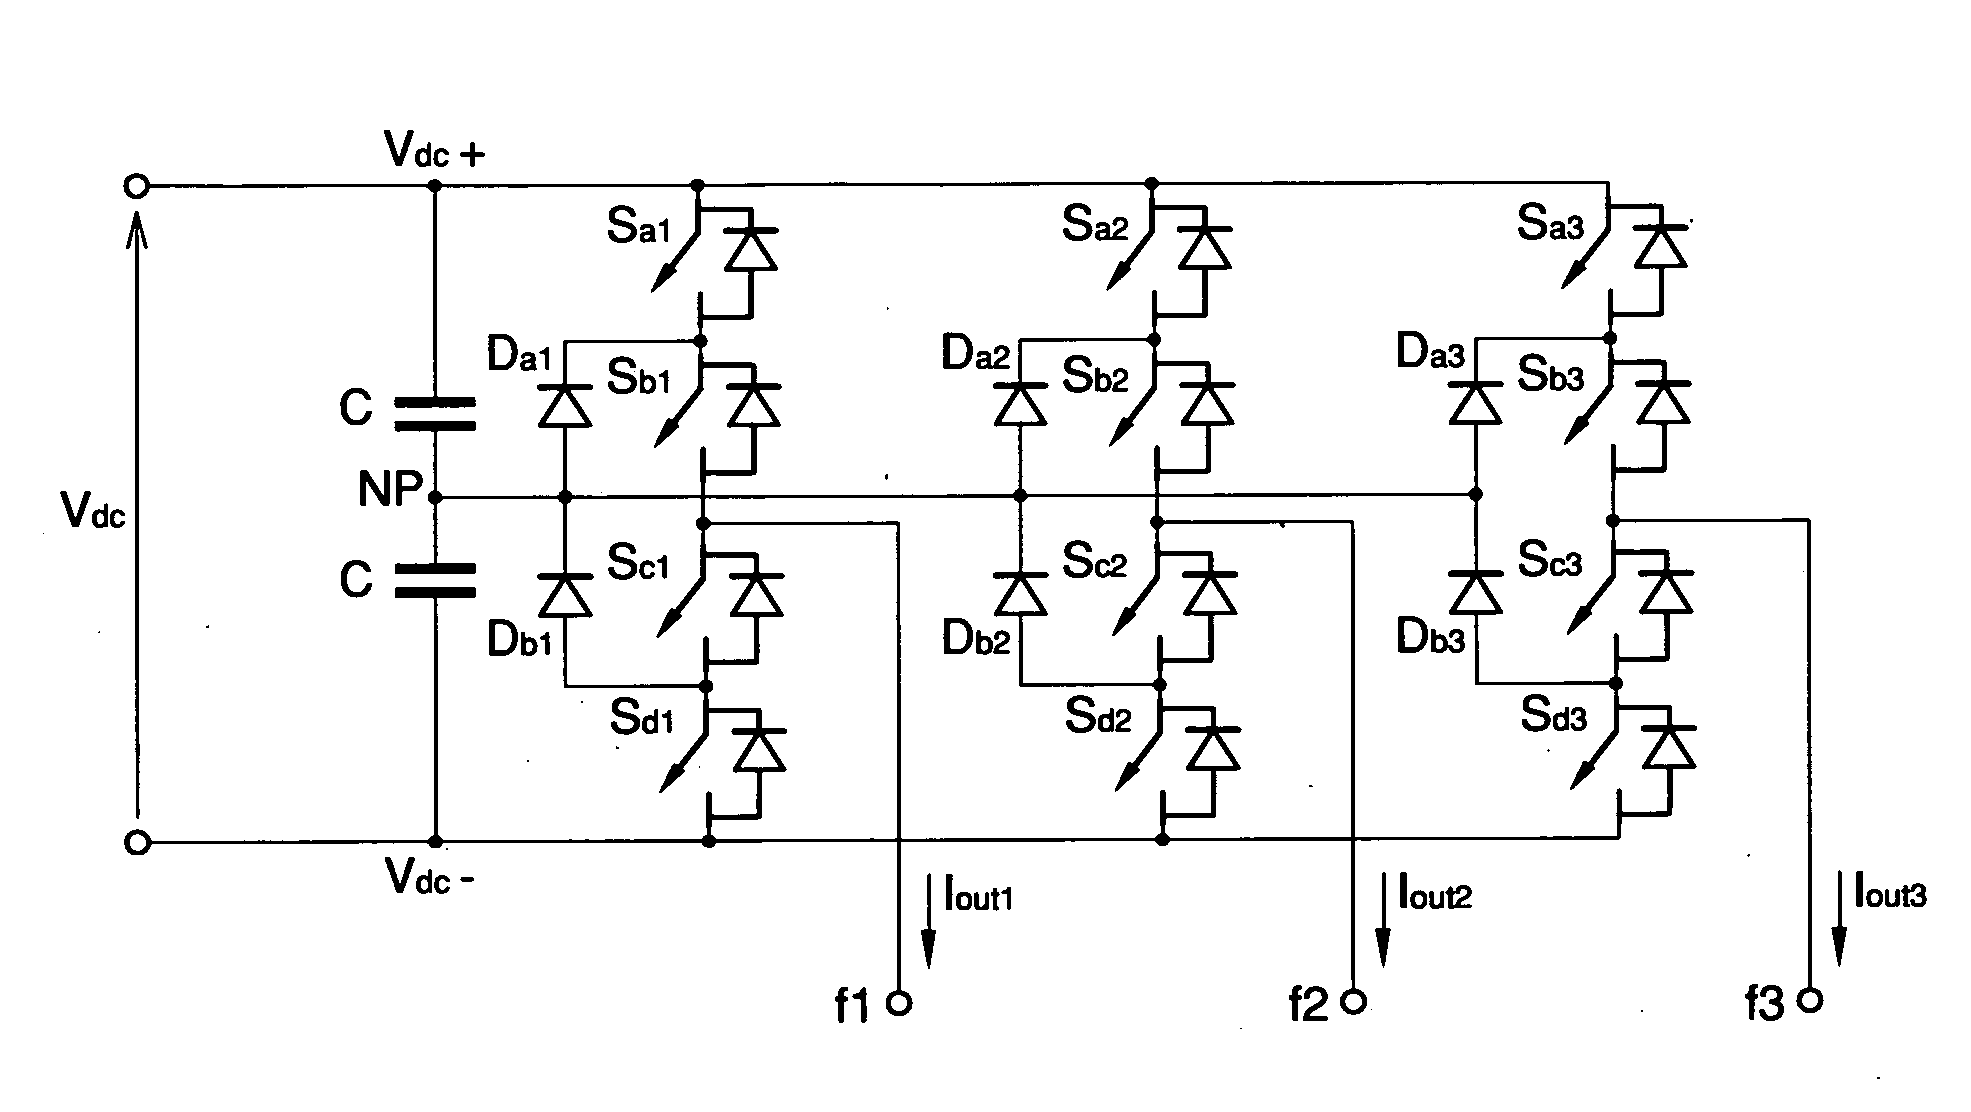 System and method for offsetting the input voltage unbalance in multilevel inverters or the like